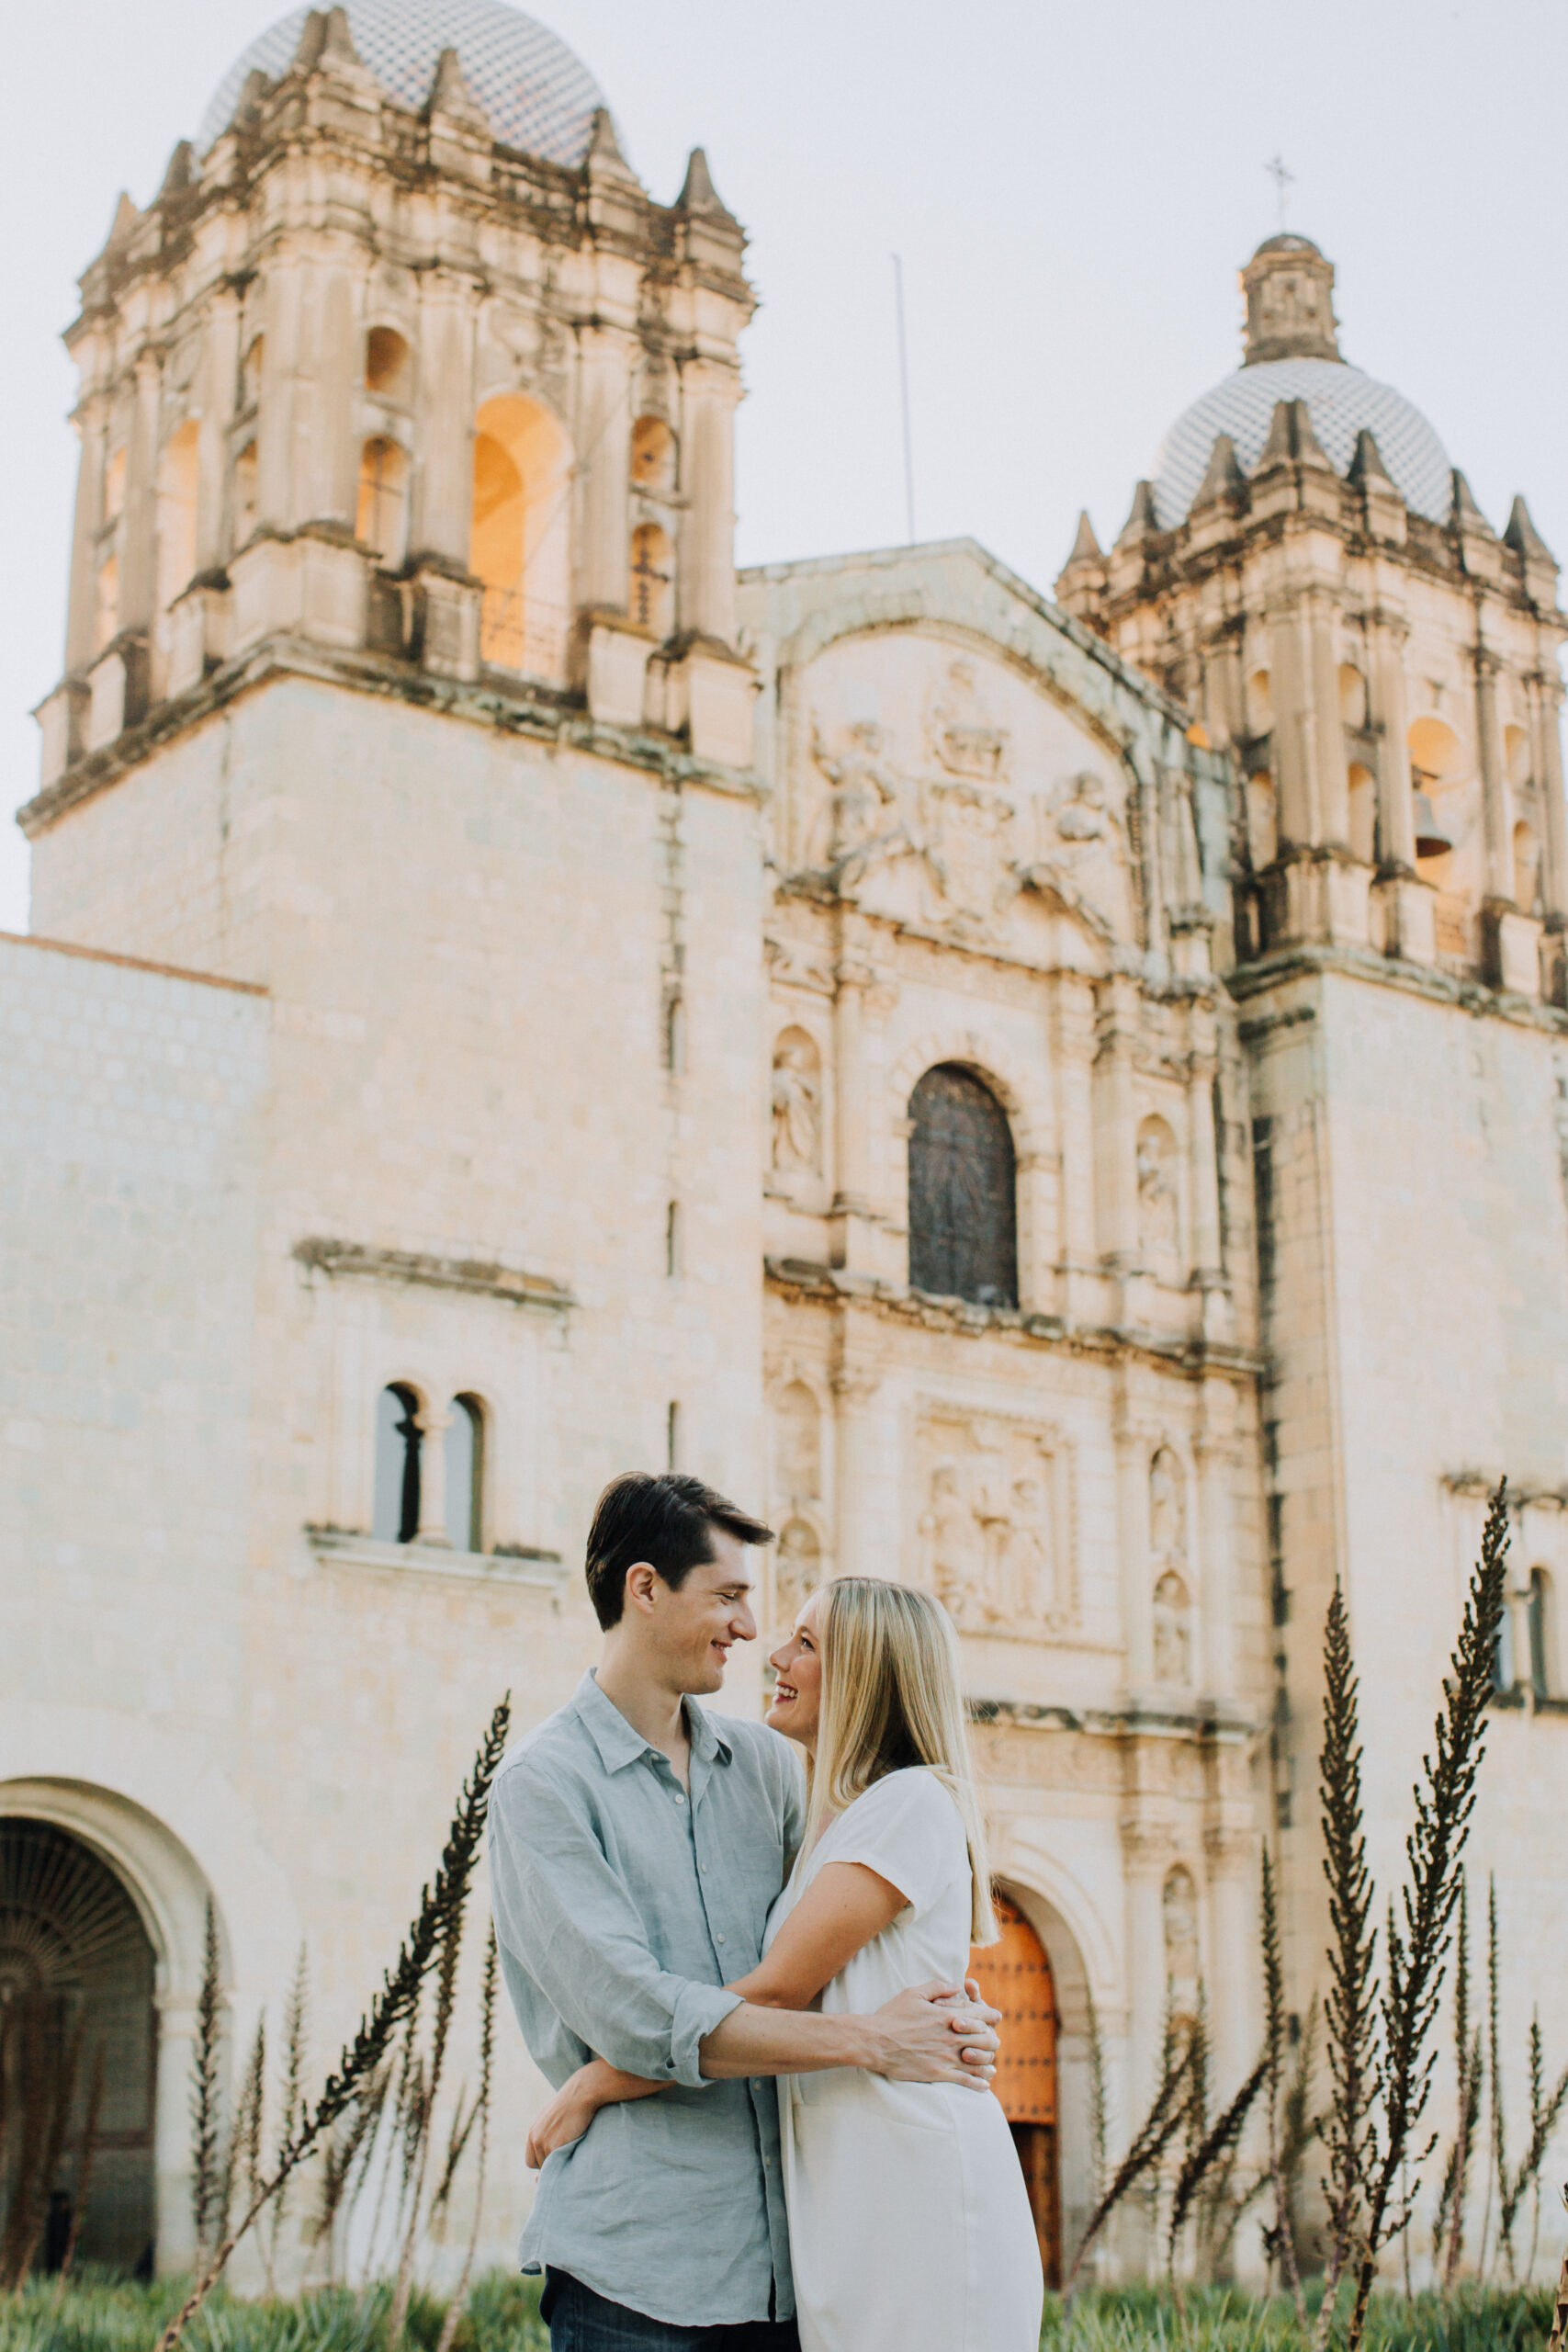 stunning Oaxaca City Engagement Photos with beautiful architecture as a backdrop!